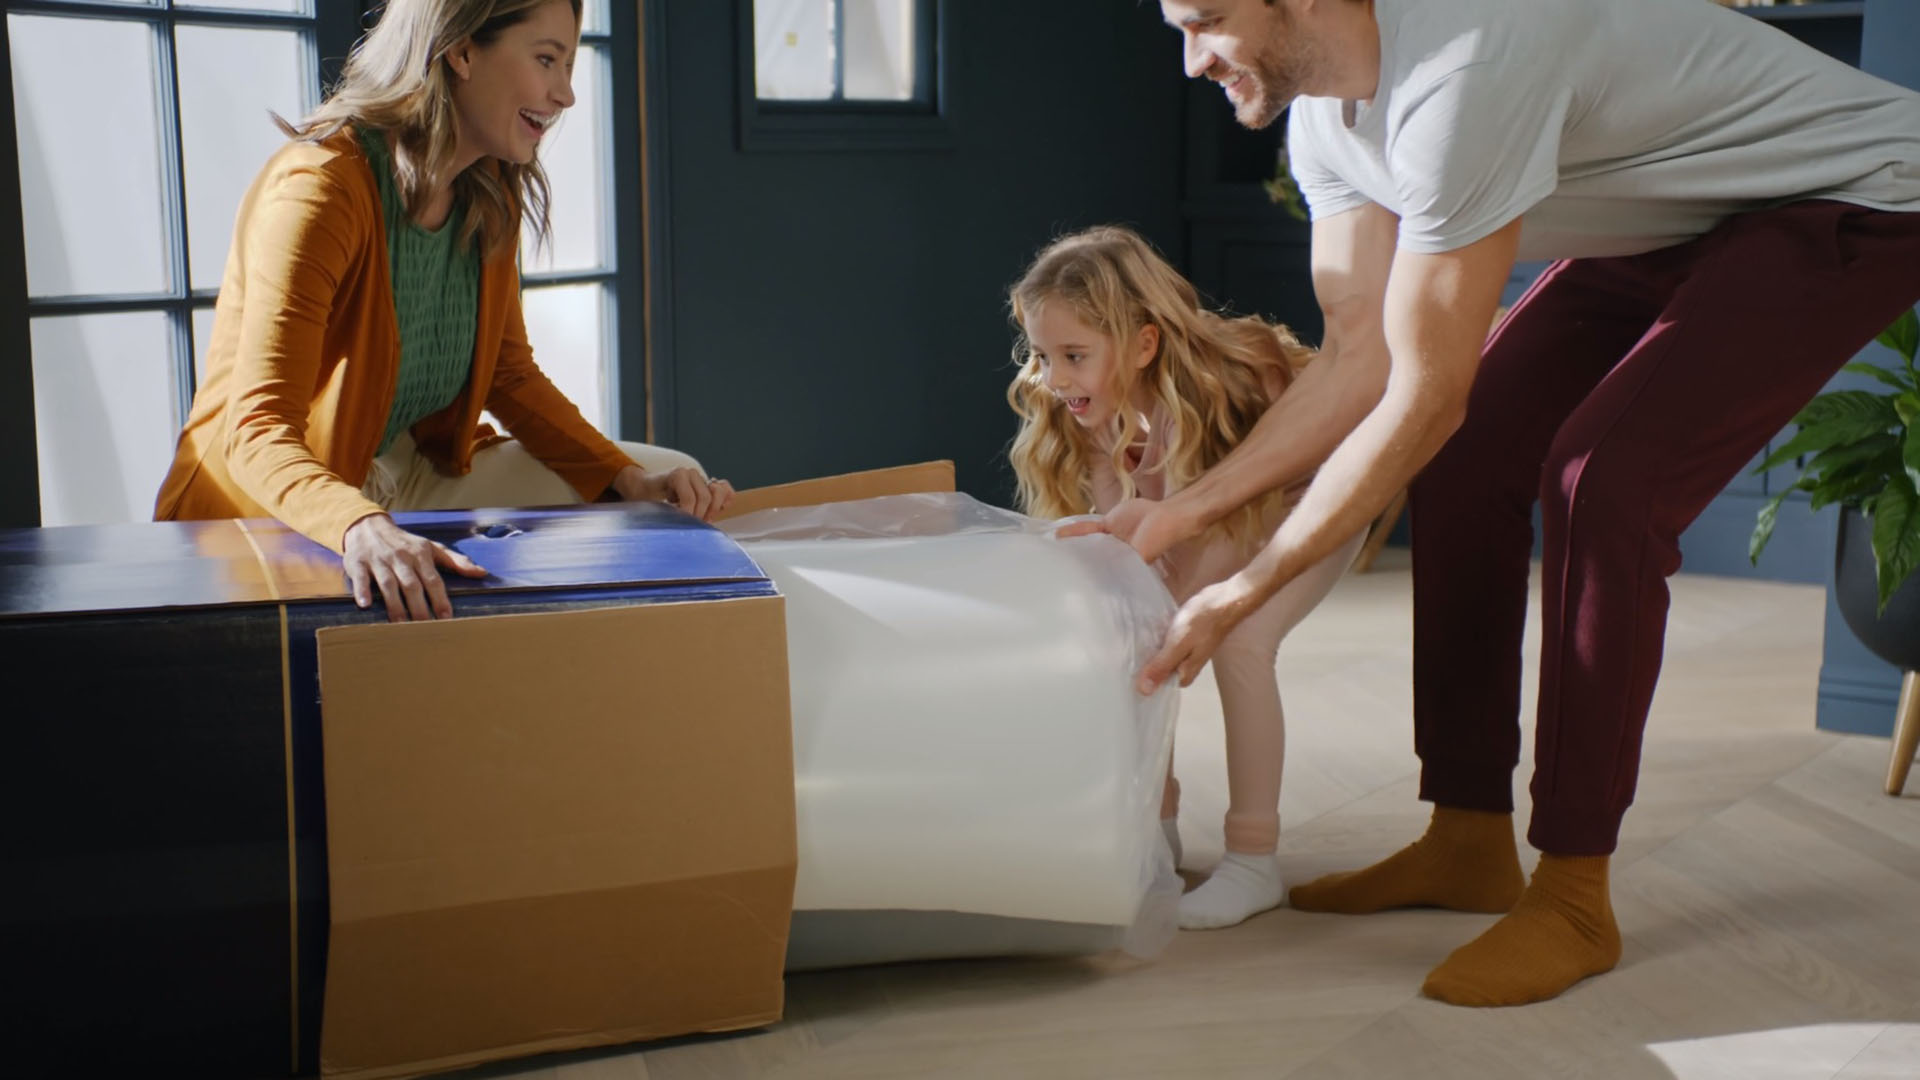 A family unboxing a Dreamcloud mattress in Plano, Texas